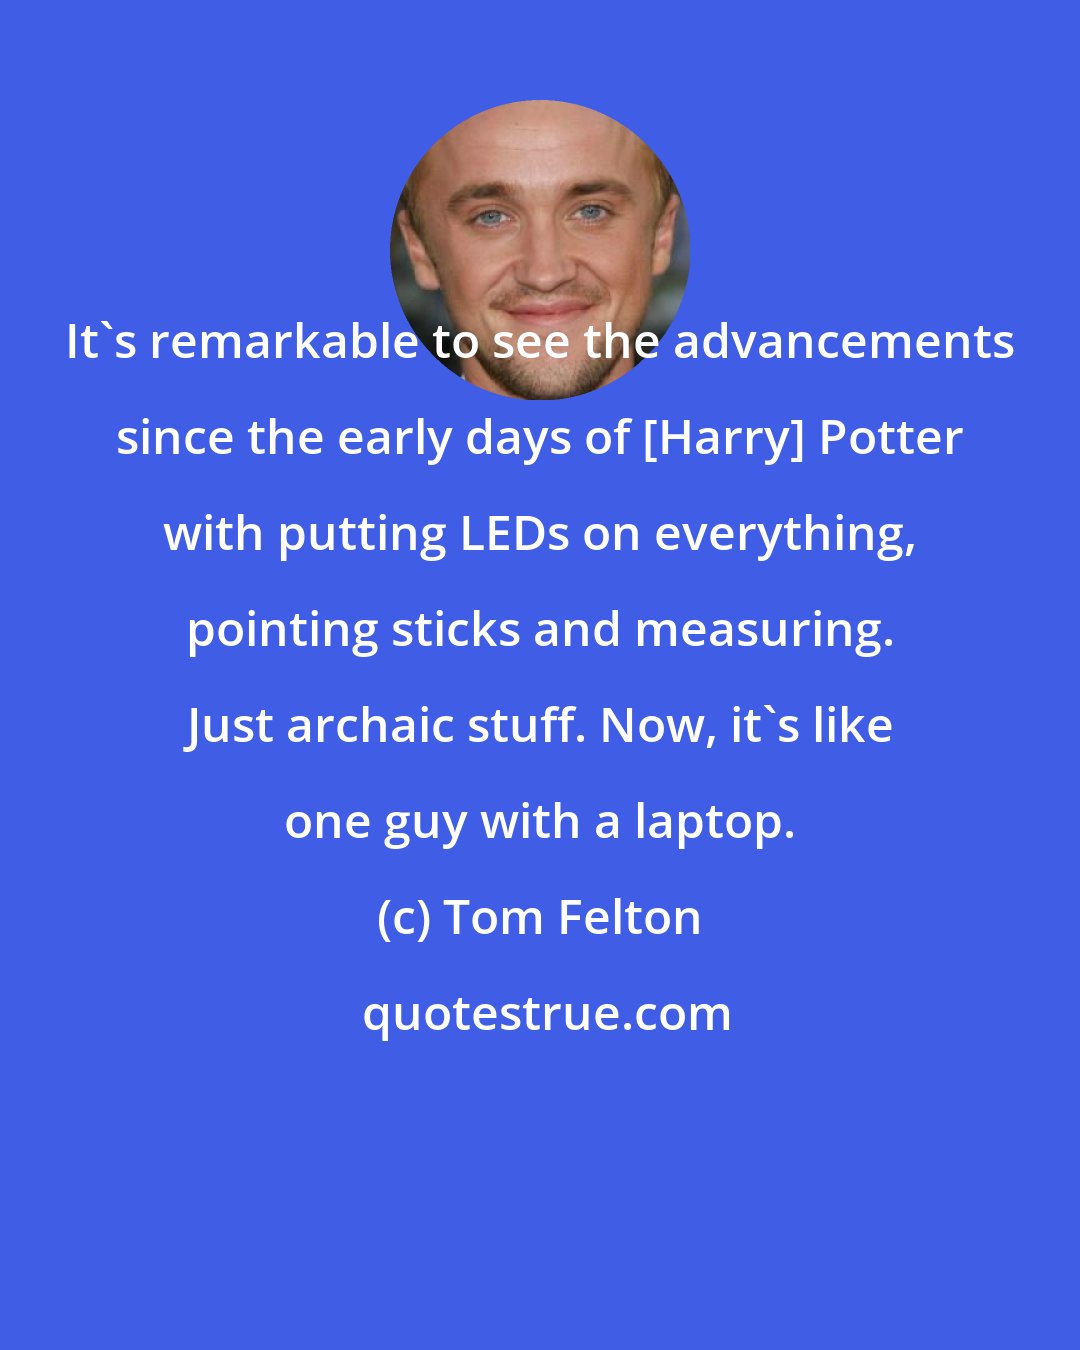 Tom Felton: It's remarkable to see the advancements since the early days of [Harry] Potter with putting LEDs on everything, pointing sticks and measuring. Just archaic stuff. Now, it's like one guy with a laptop.